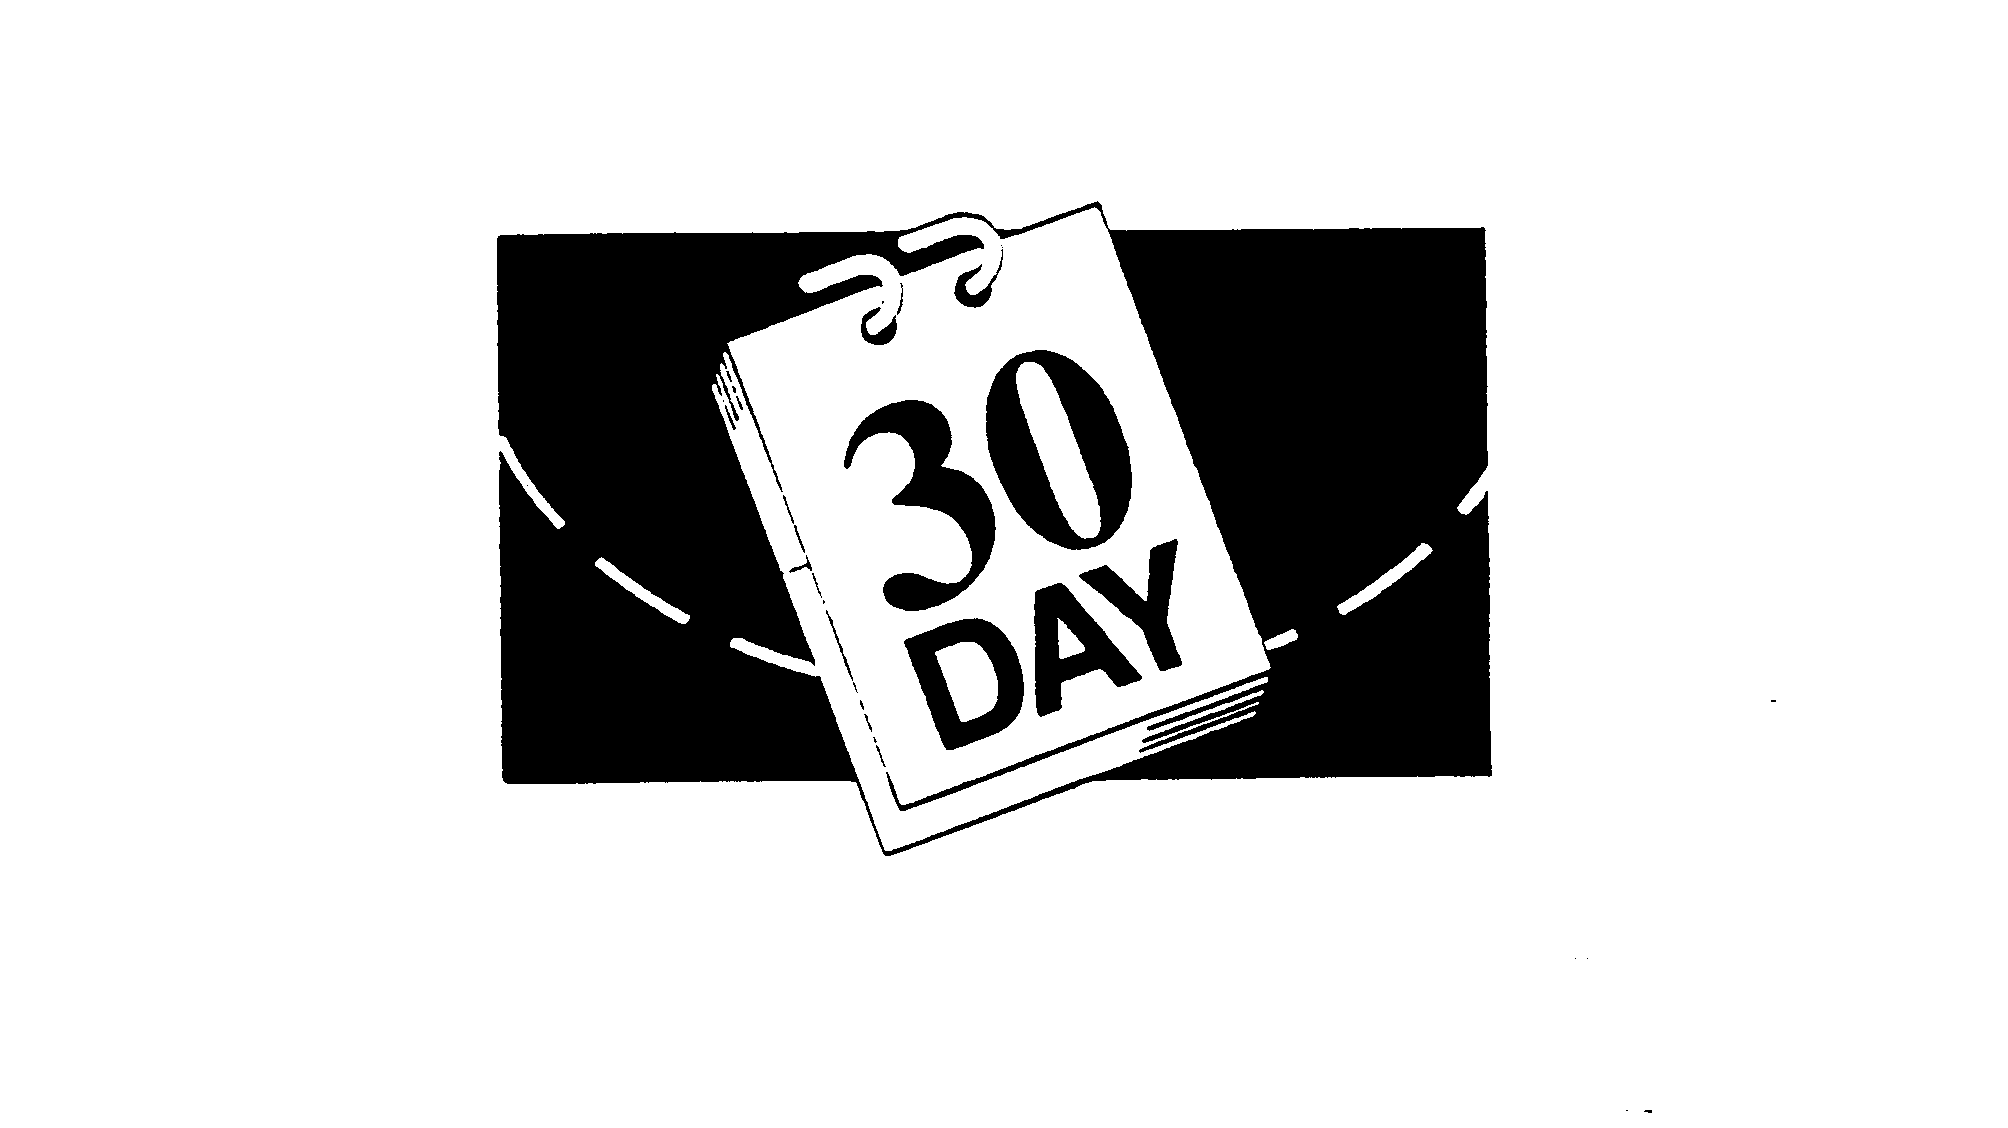  30 DAY